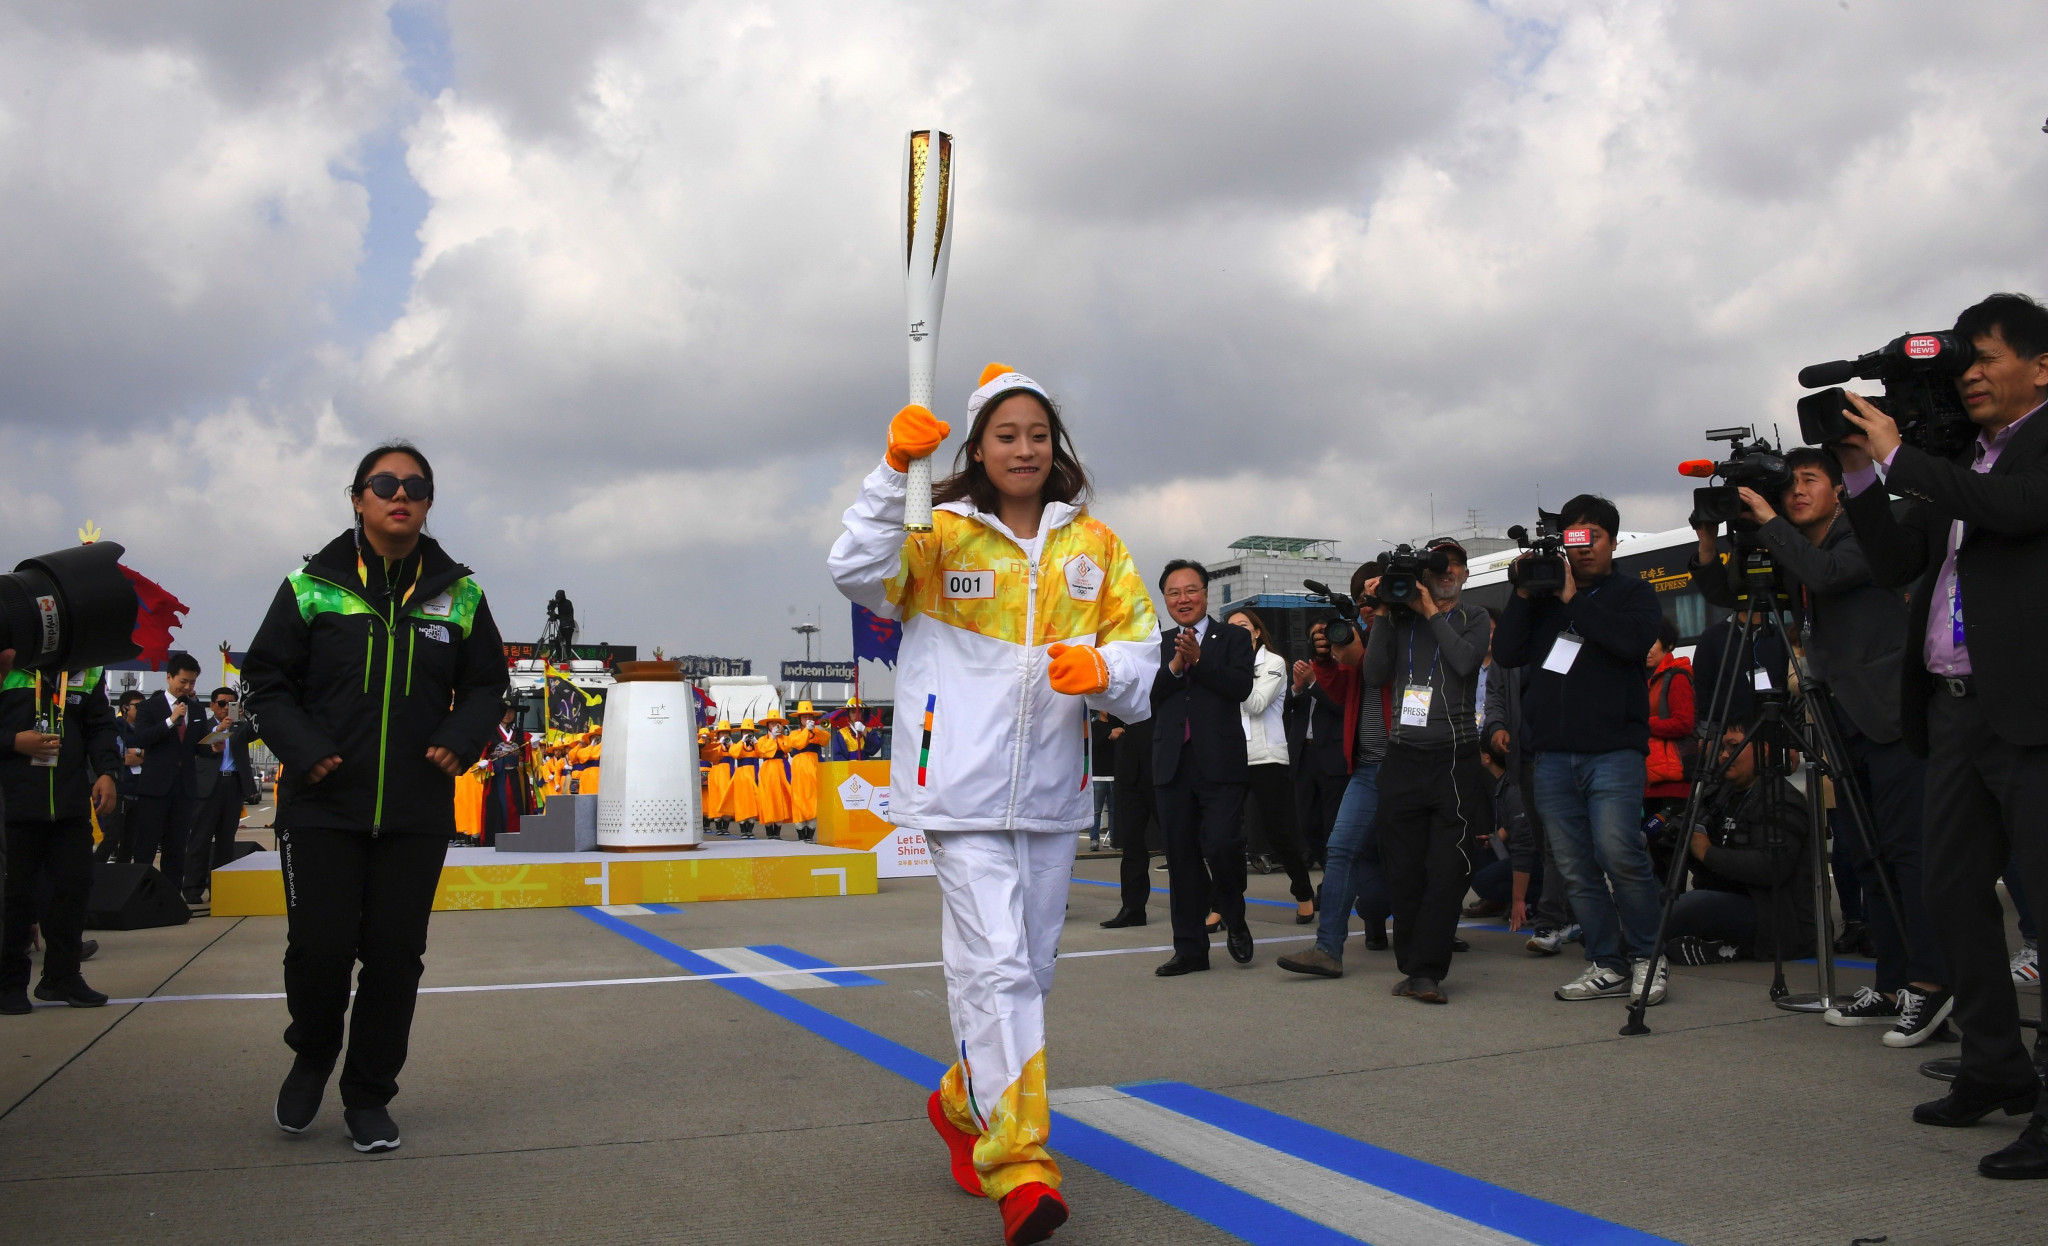 You Young carried the Torch the first 200 metres across the bridge ©Getty Images